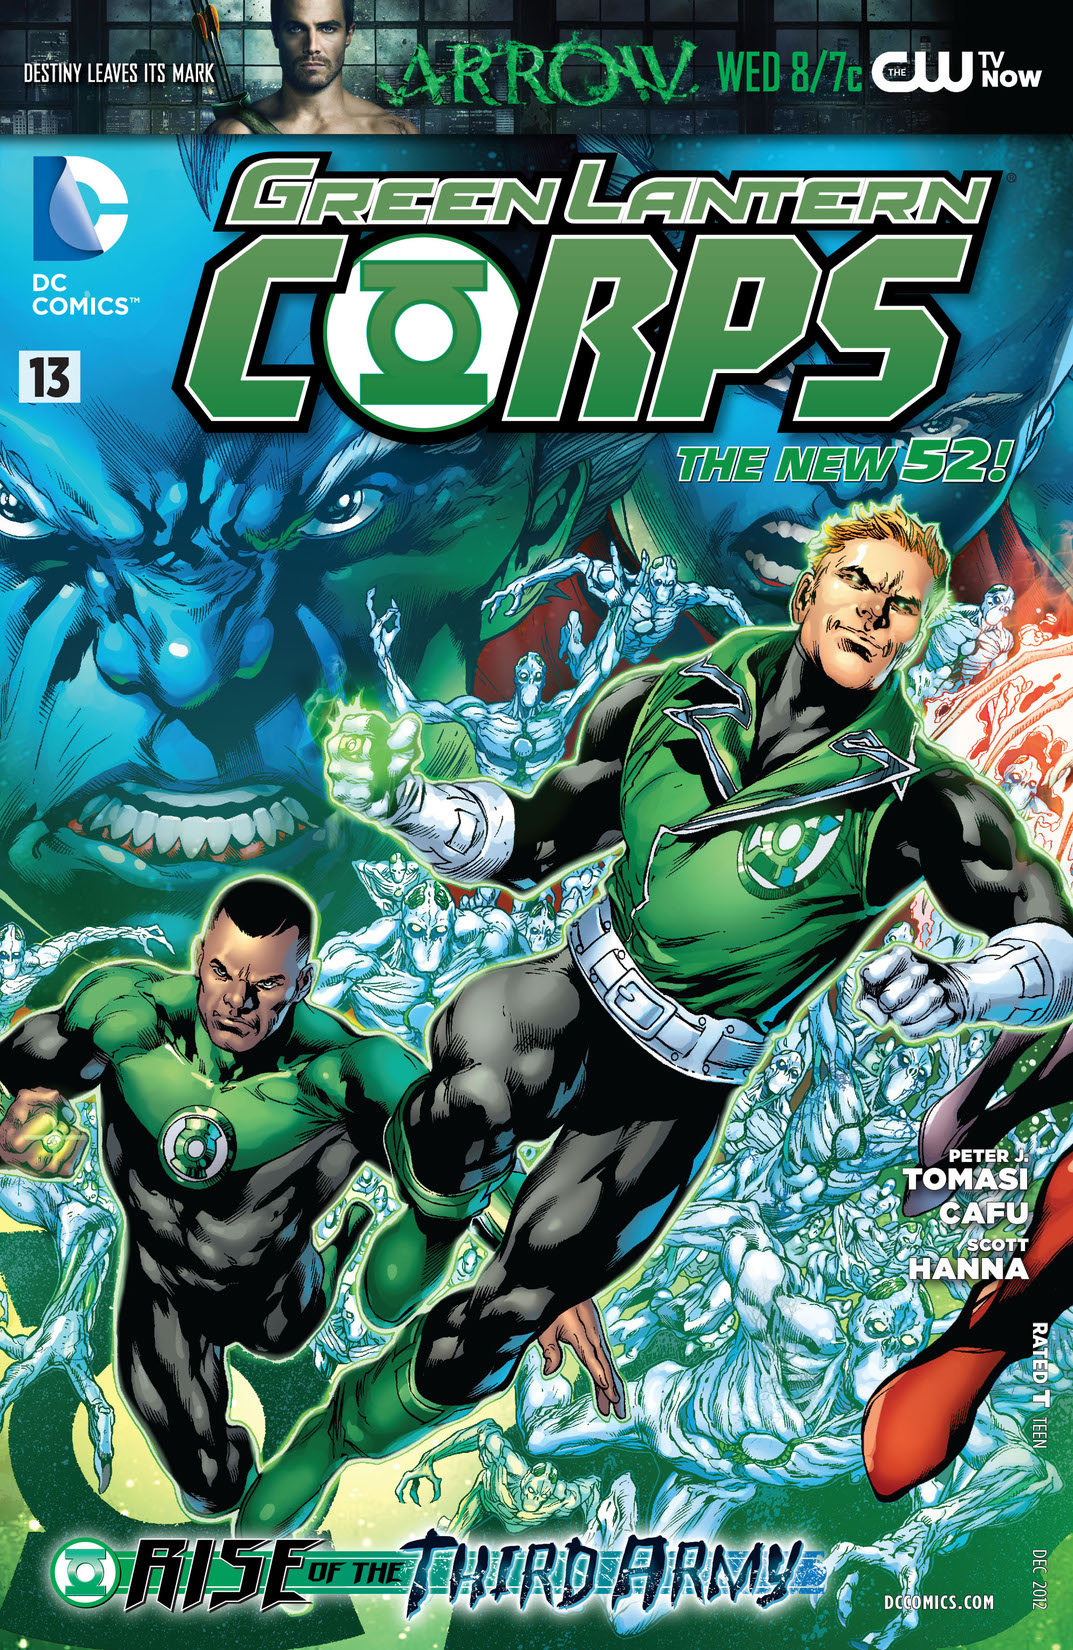 Green Lantern Corps (2011-) #13 preview images